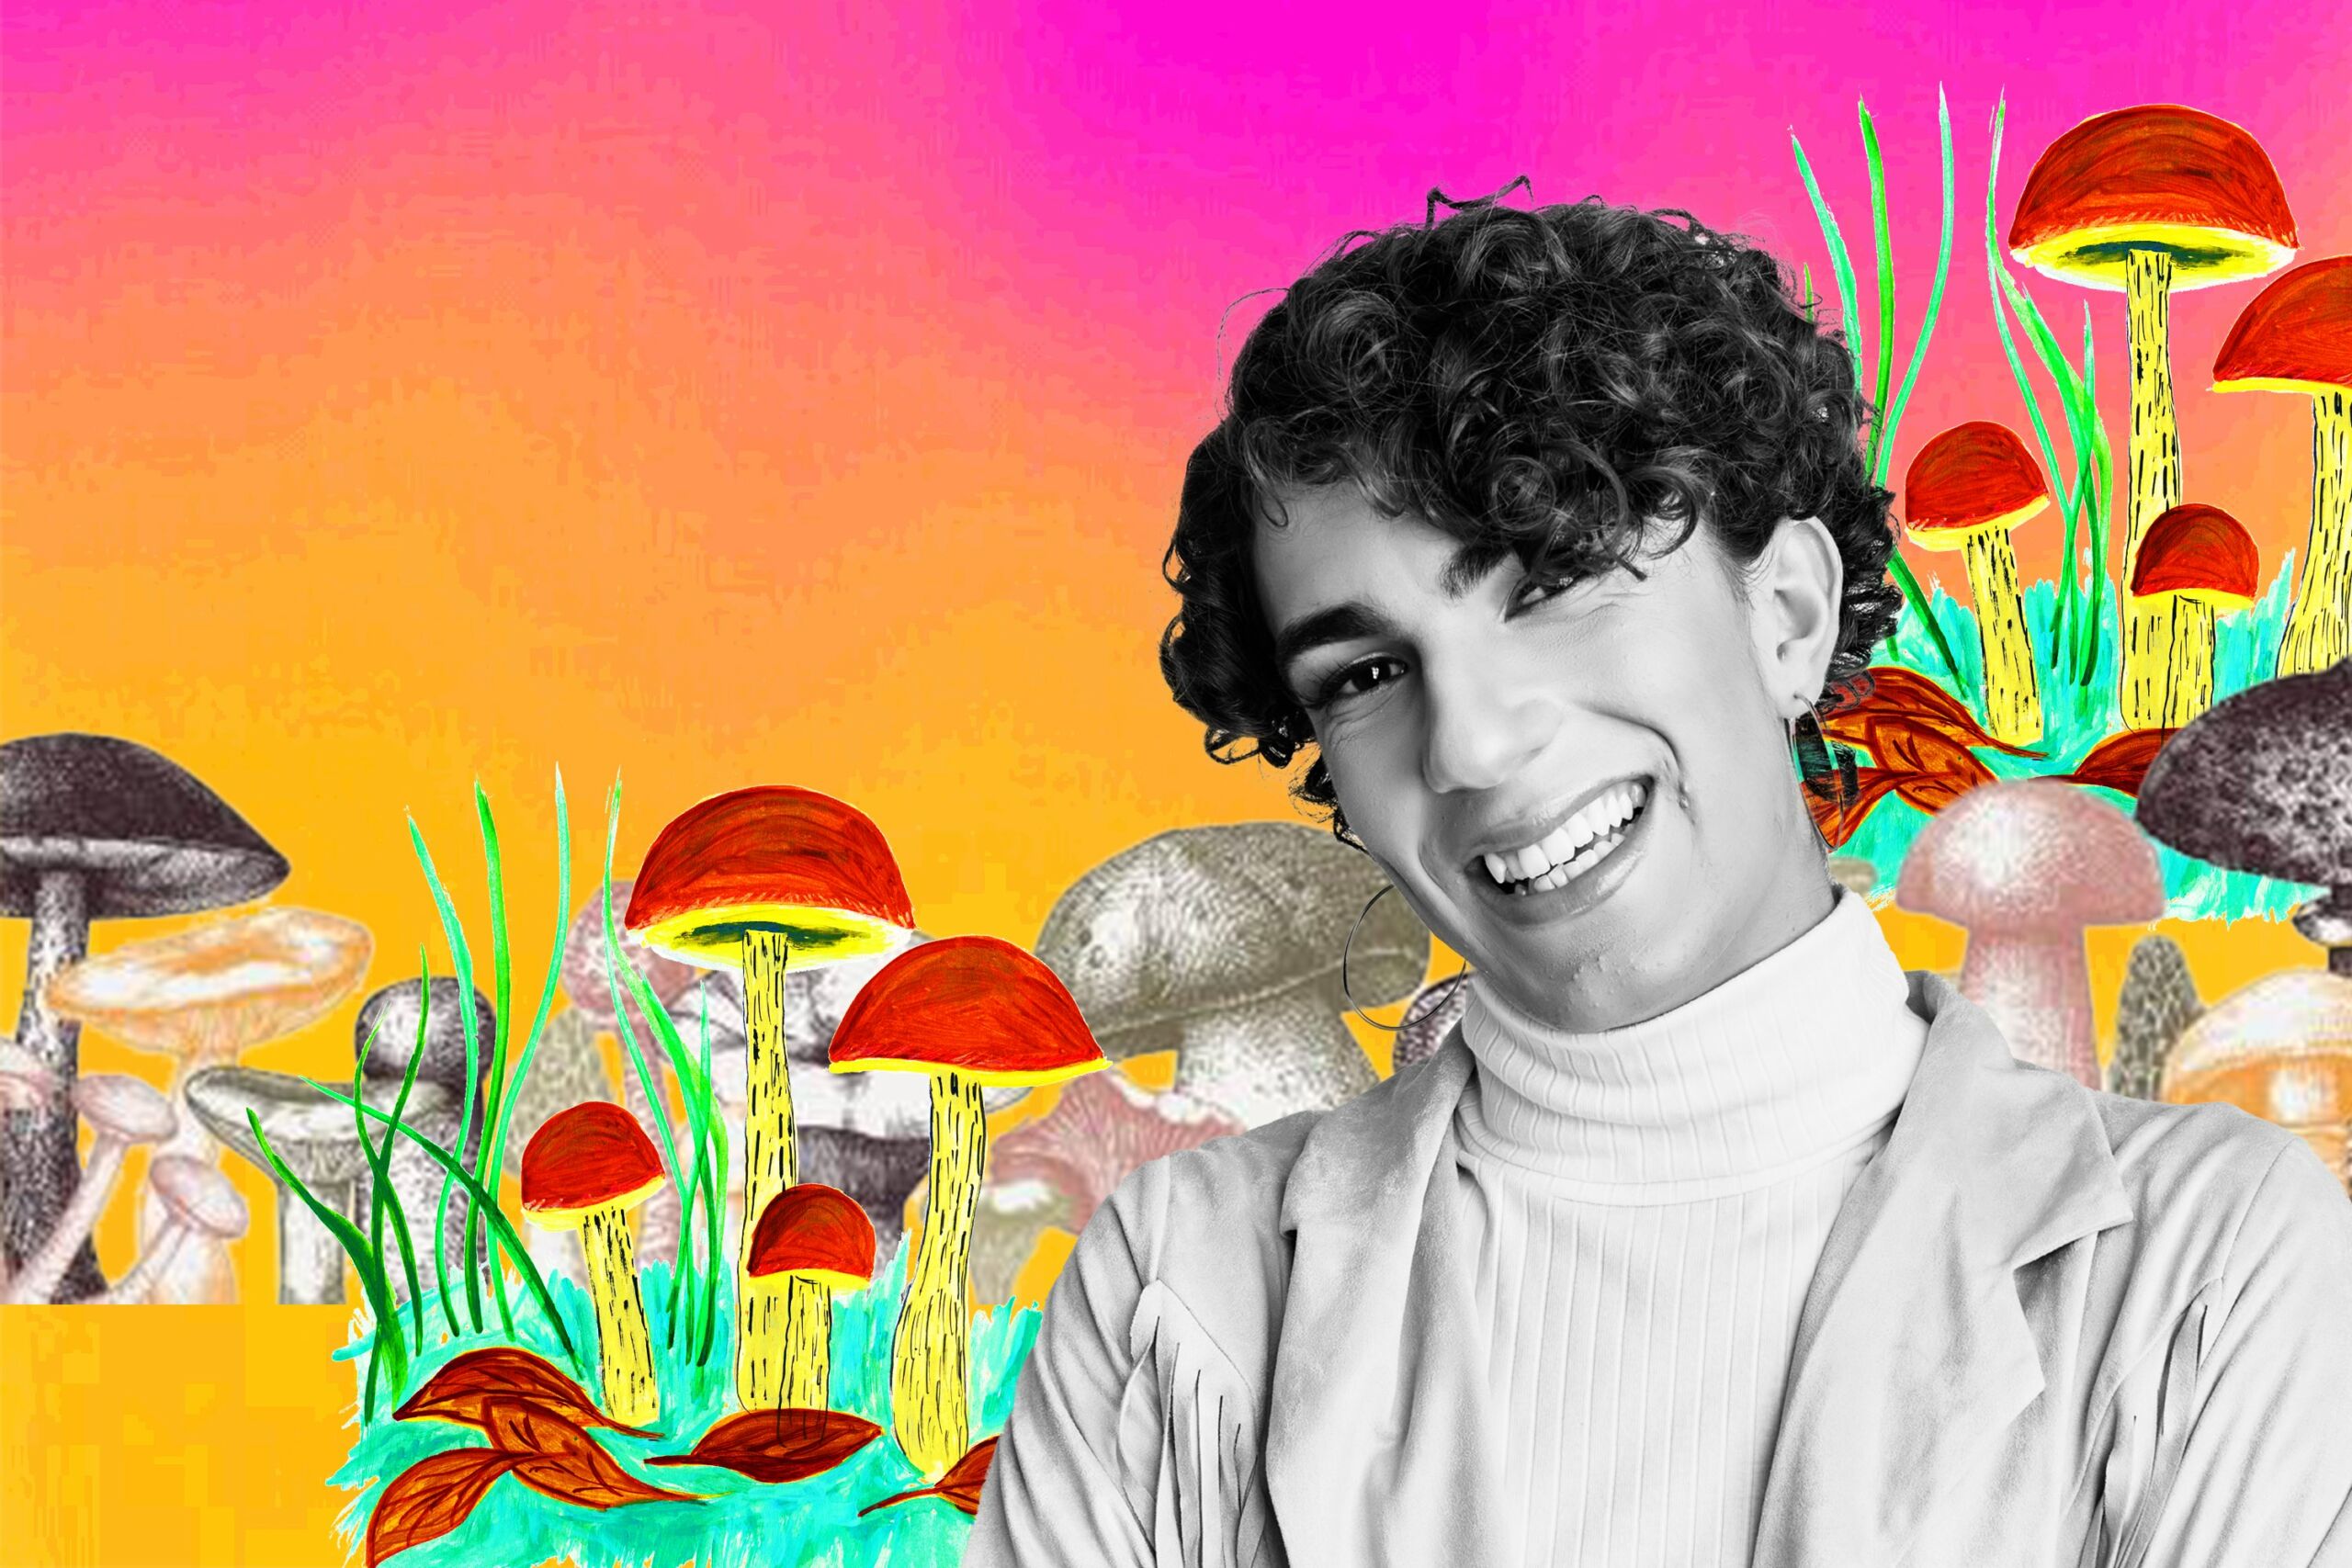 A person with short curly hair in a turtleneck smiling against a virtual background of mushrooms and orange-fuchsia gradient